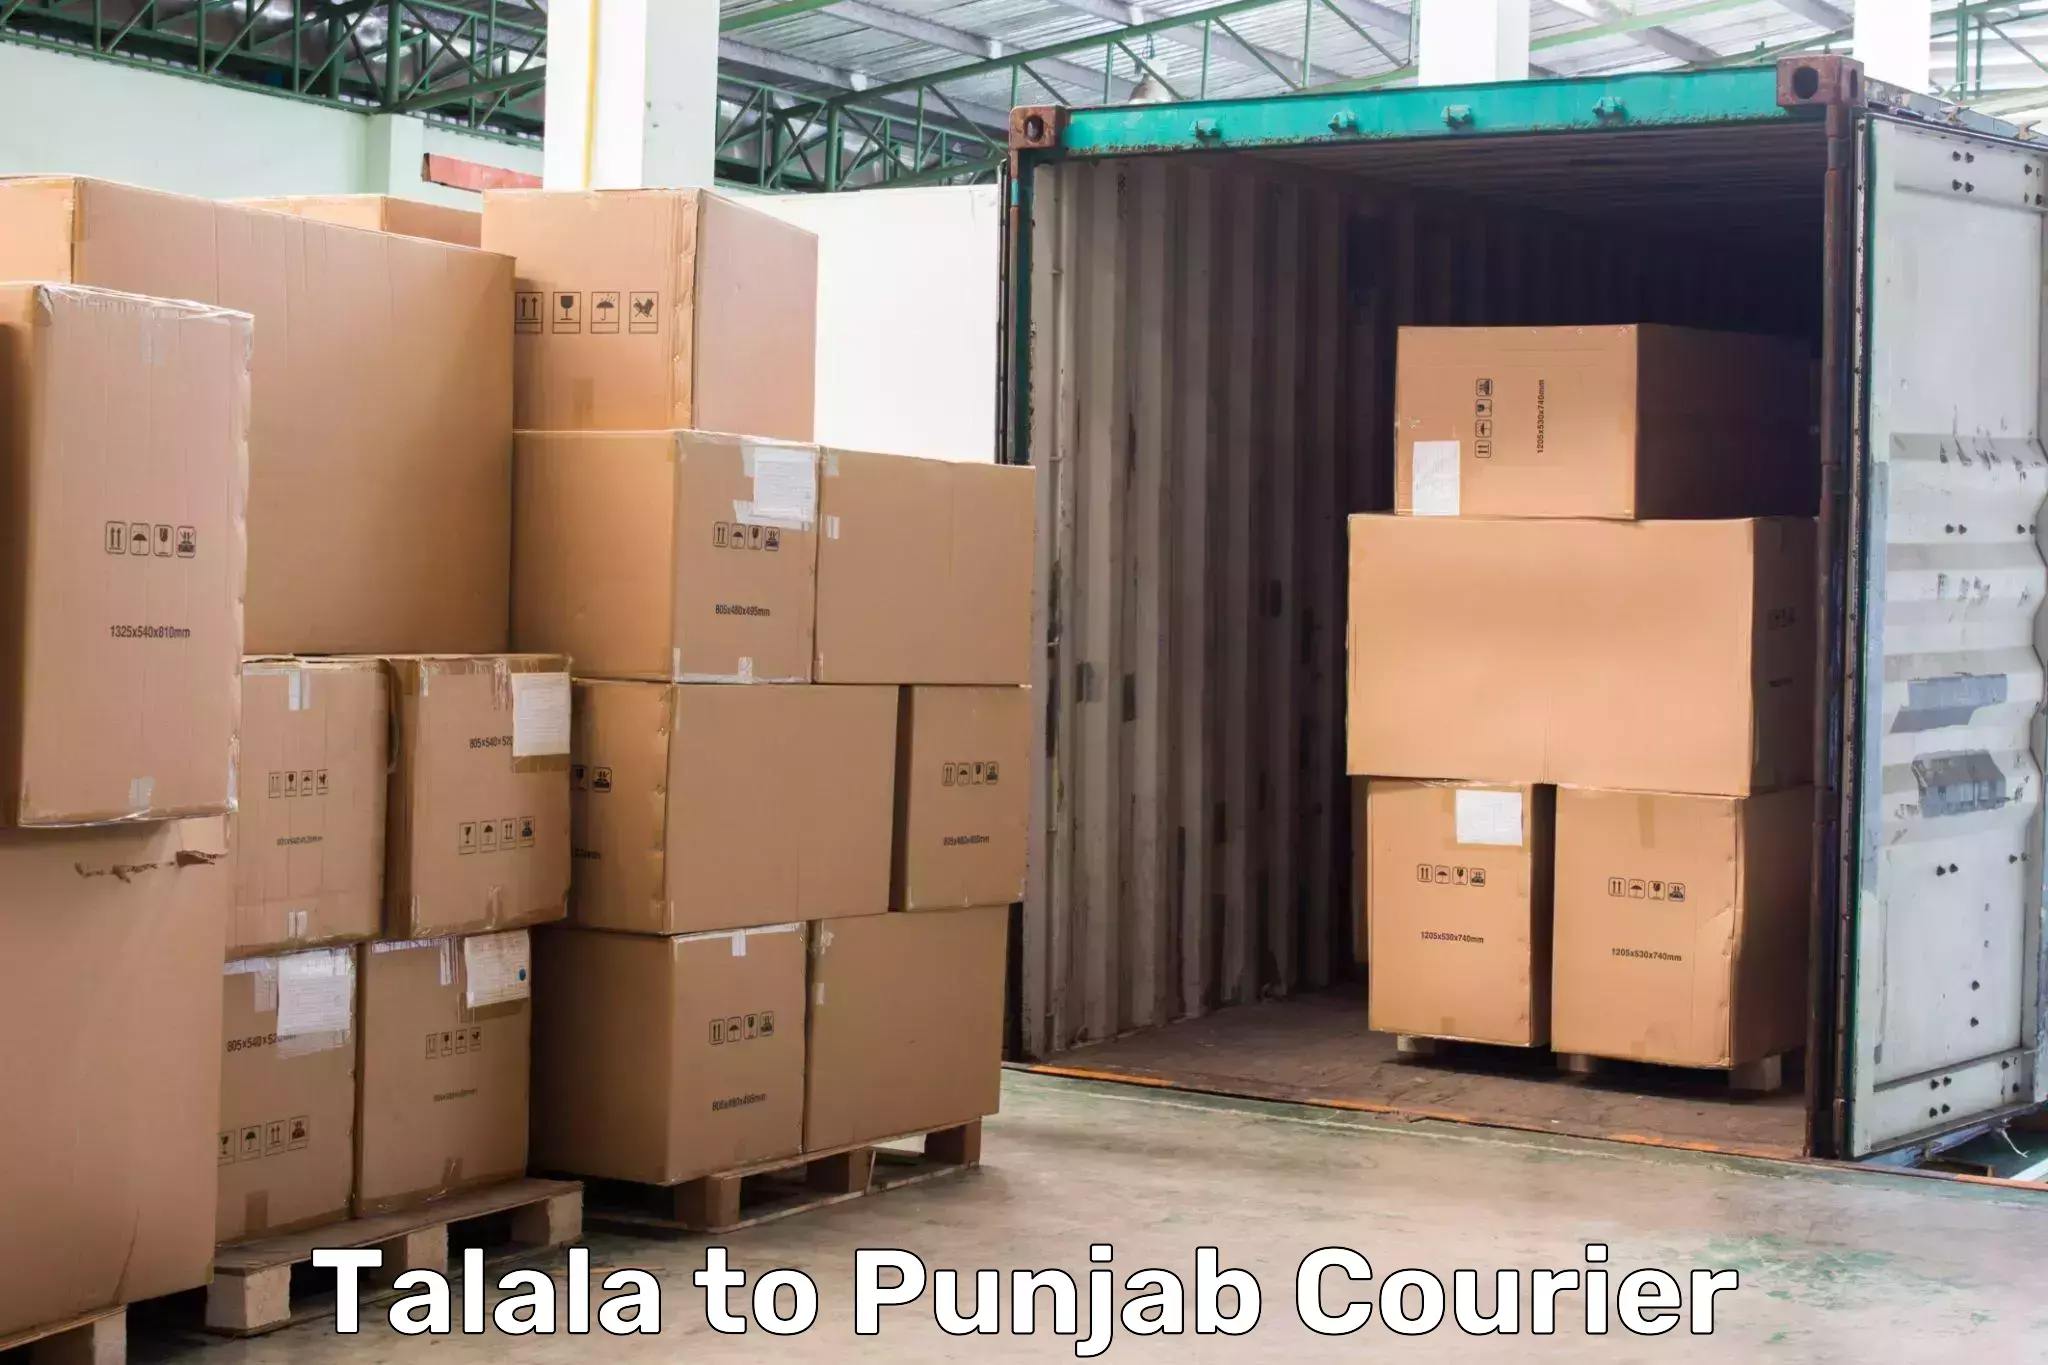 Global courier networks Talala to Punjab